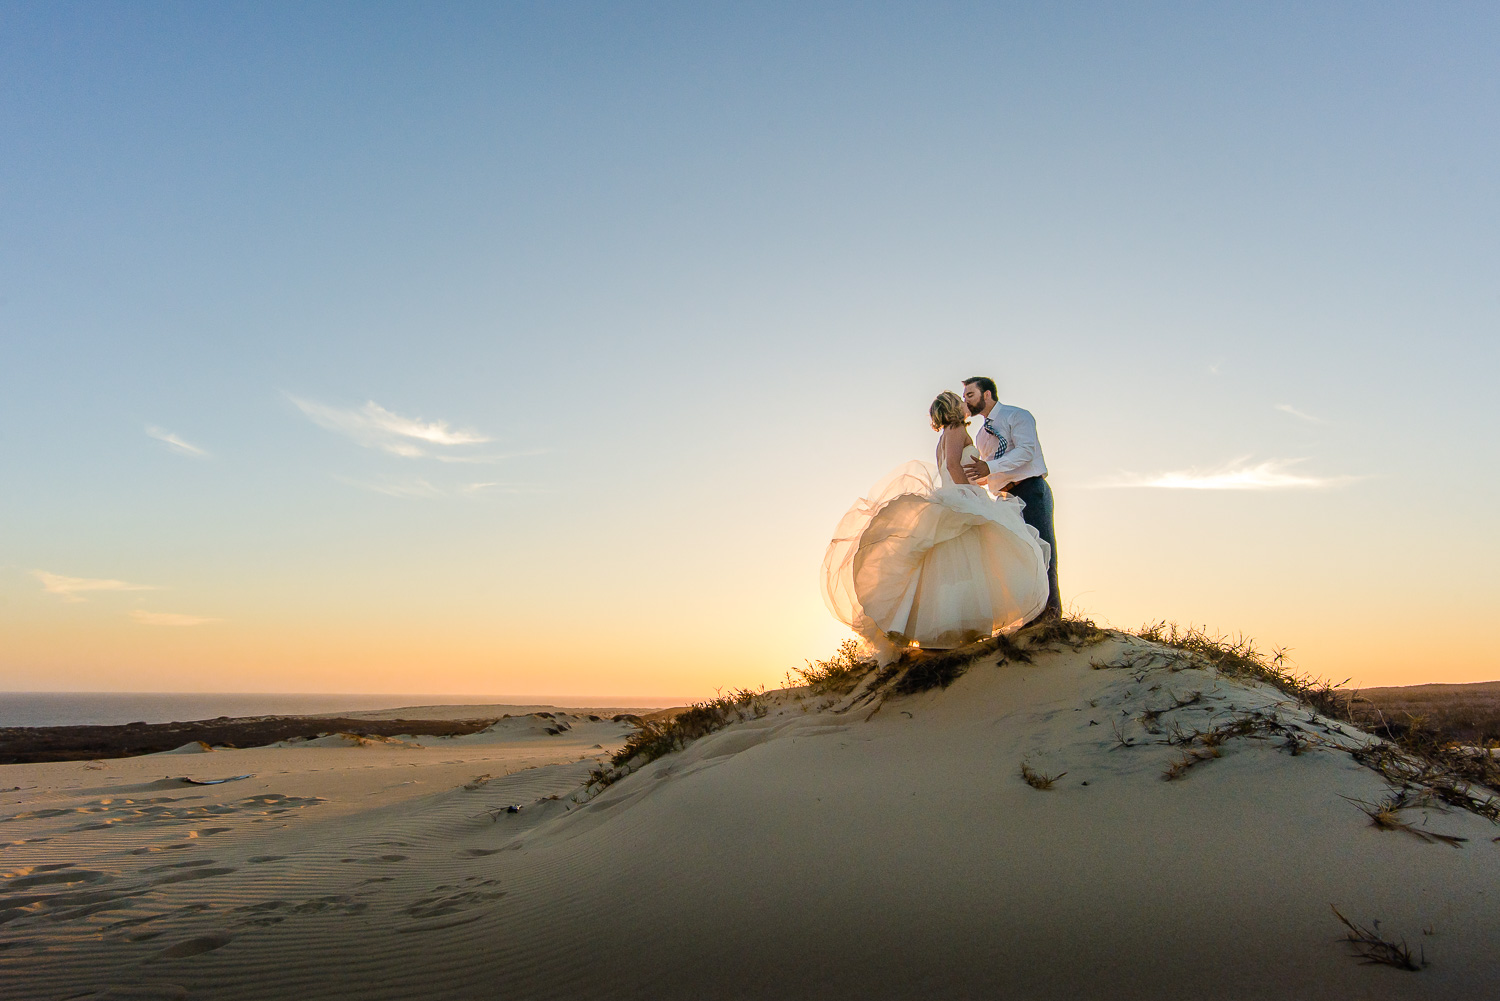  Bride and Groom kissing on top of a small dune during an amazing sunset in Cabo San Lucas 